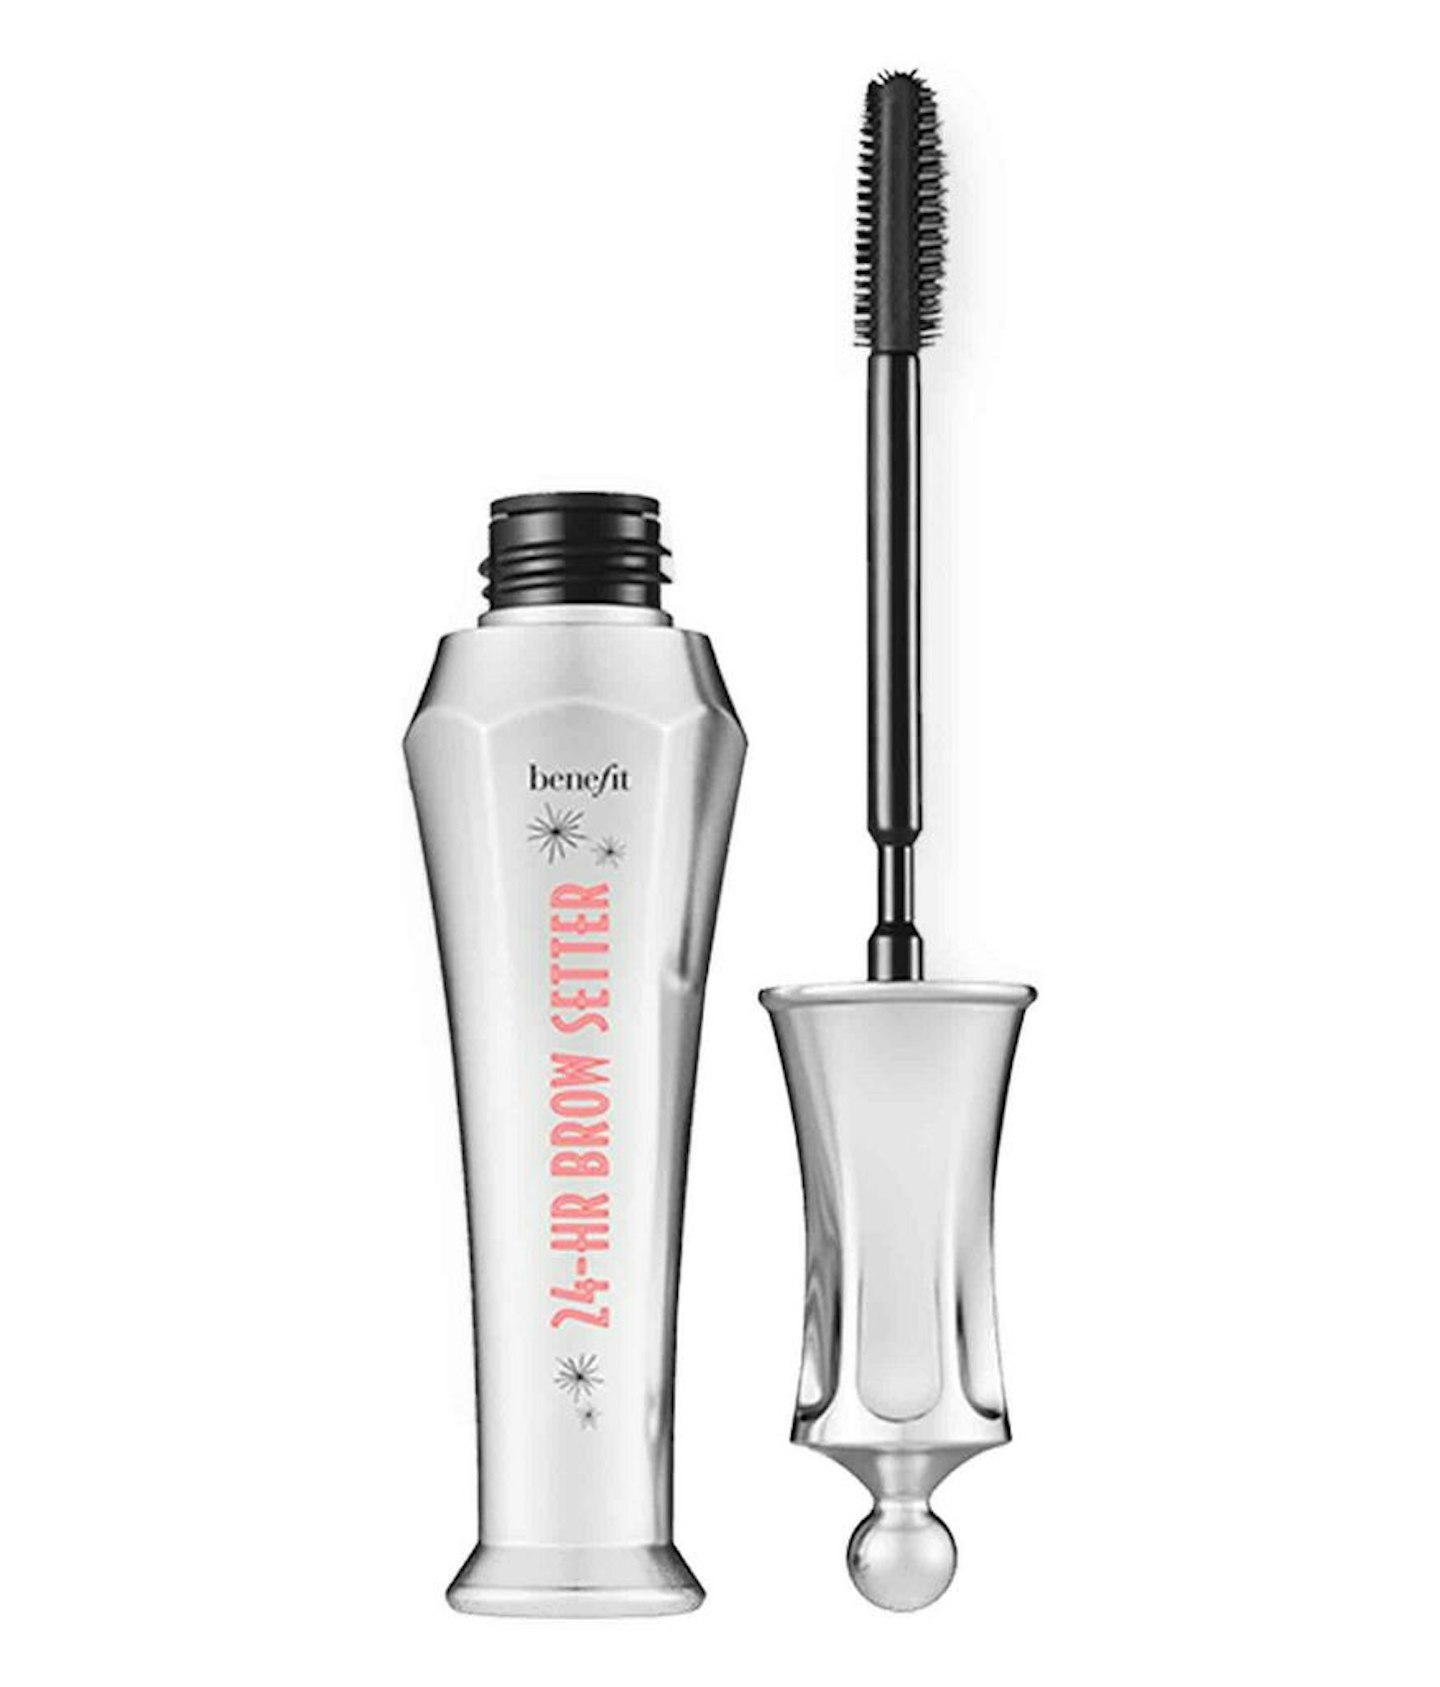 Benefit 24 Hour Brow Setter, £22.50